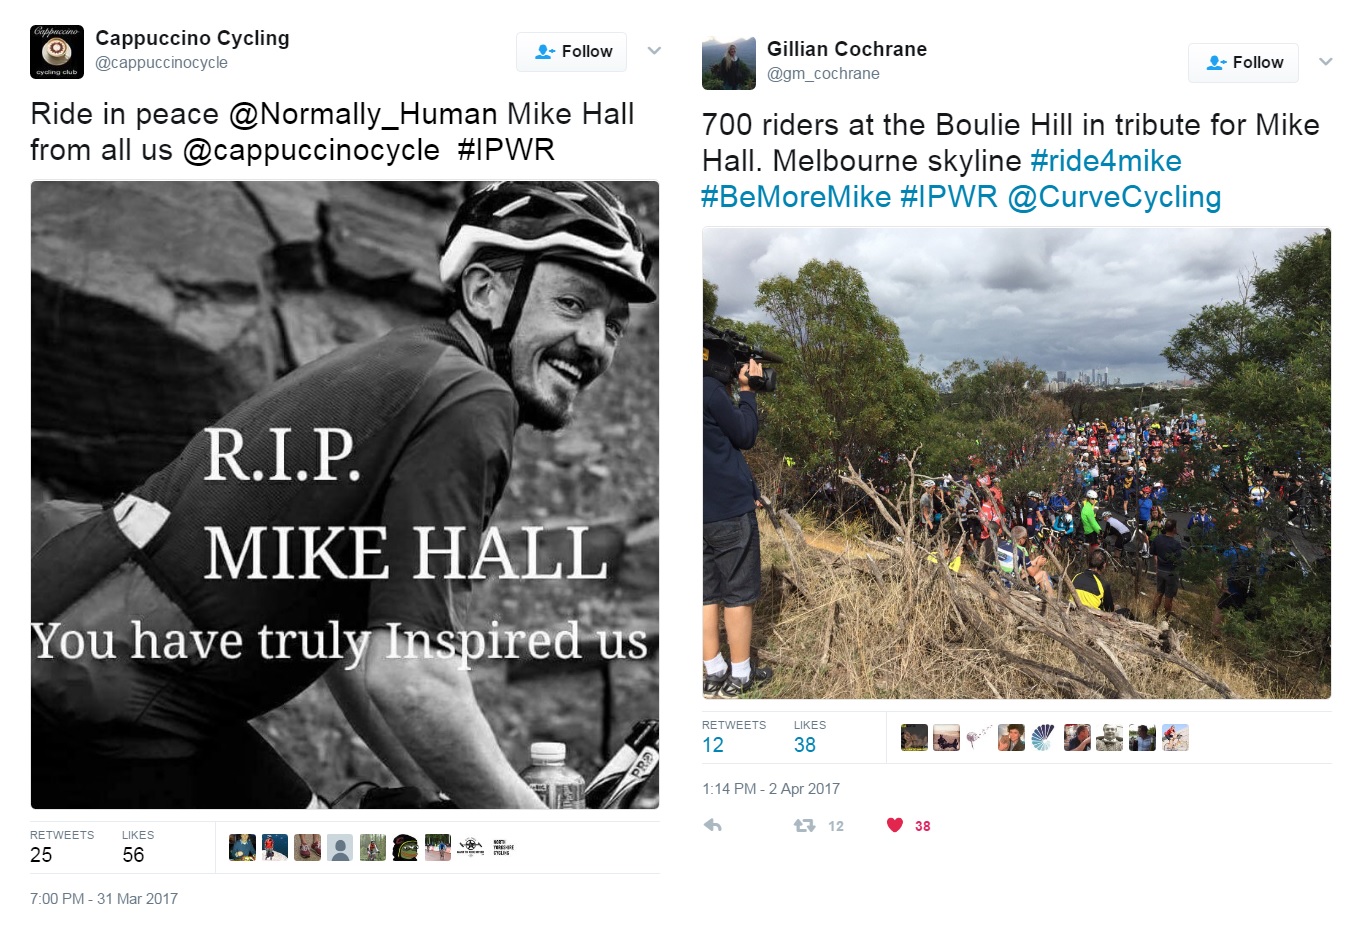 Mike Hall tributes: twitter image credit to @cappuccinocycle and @gm_cochrane